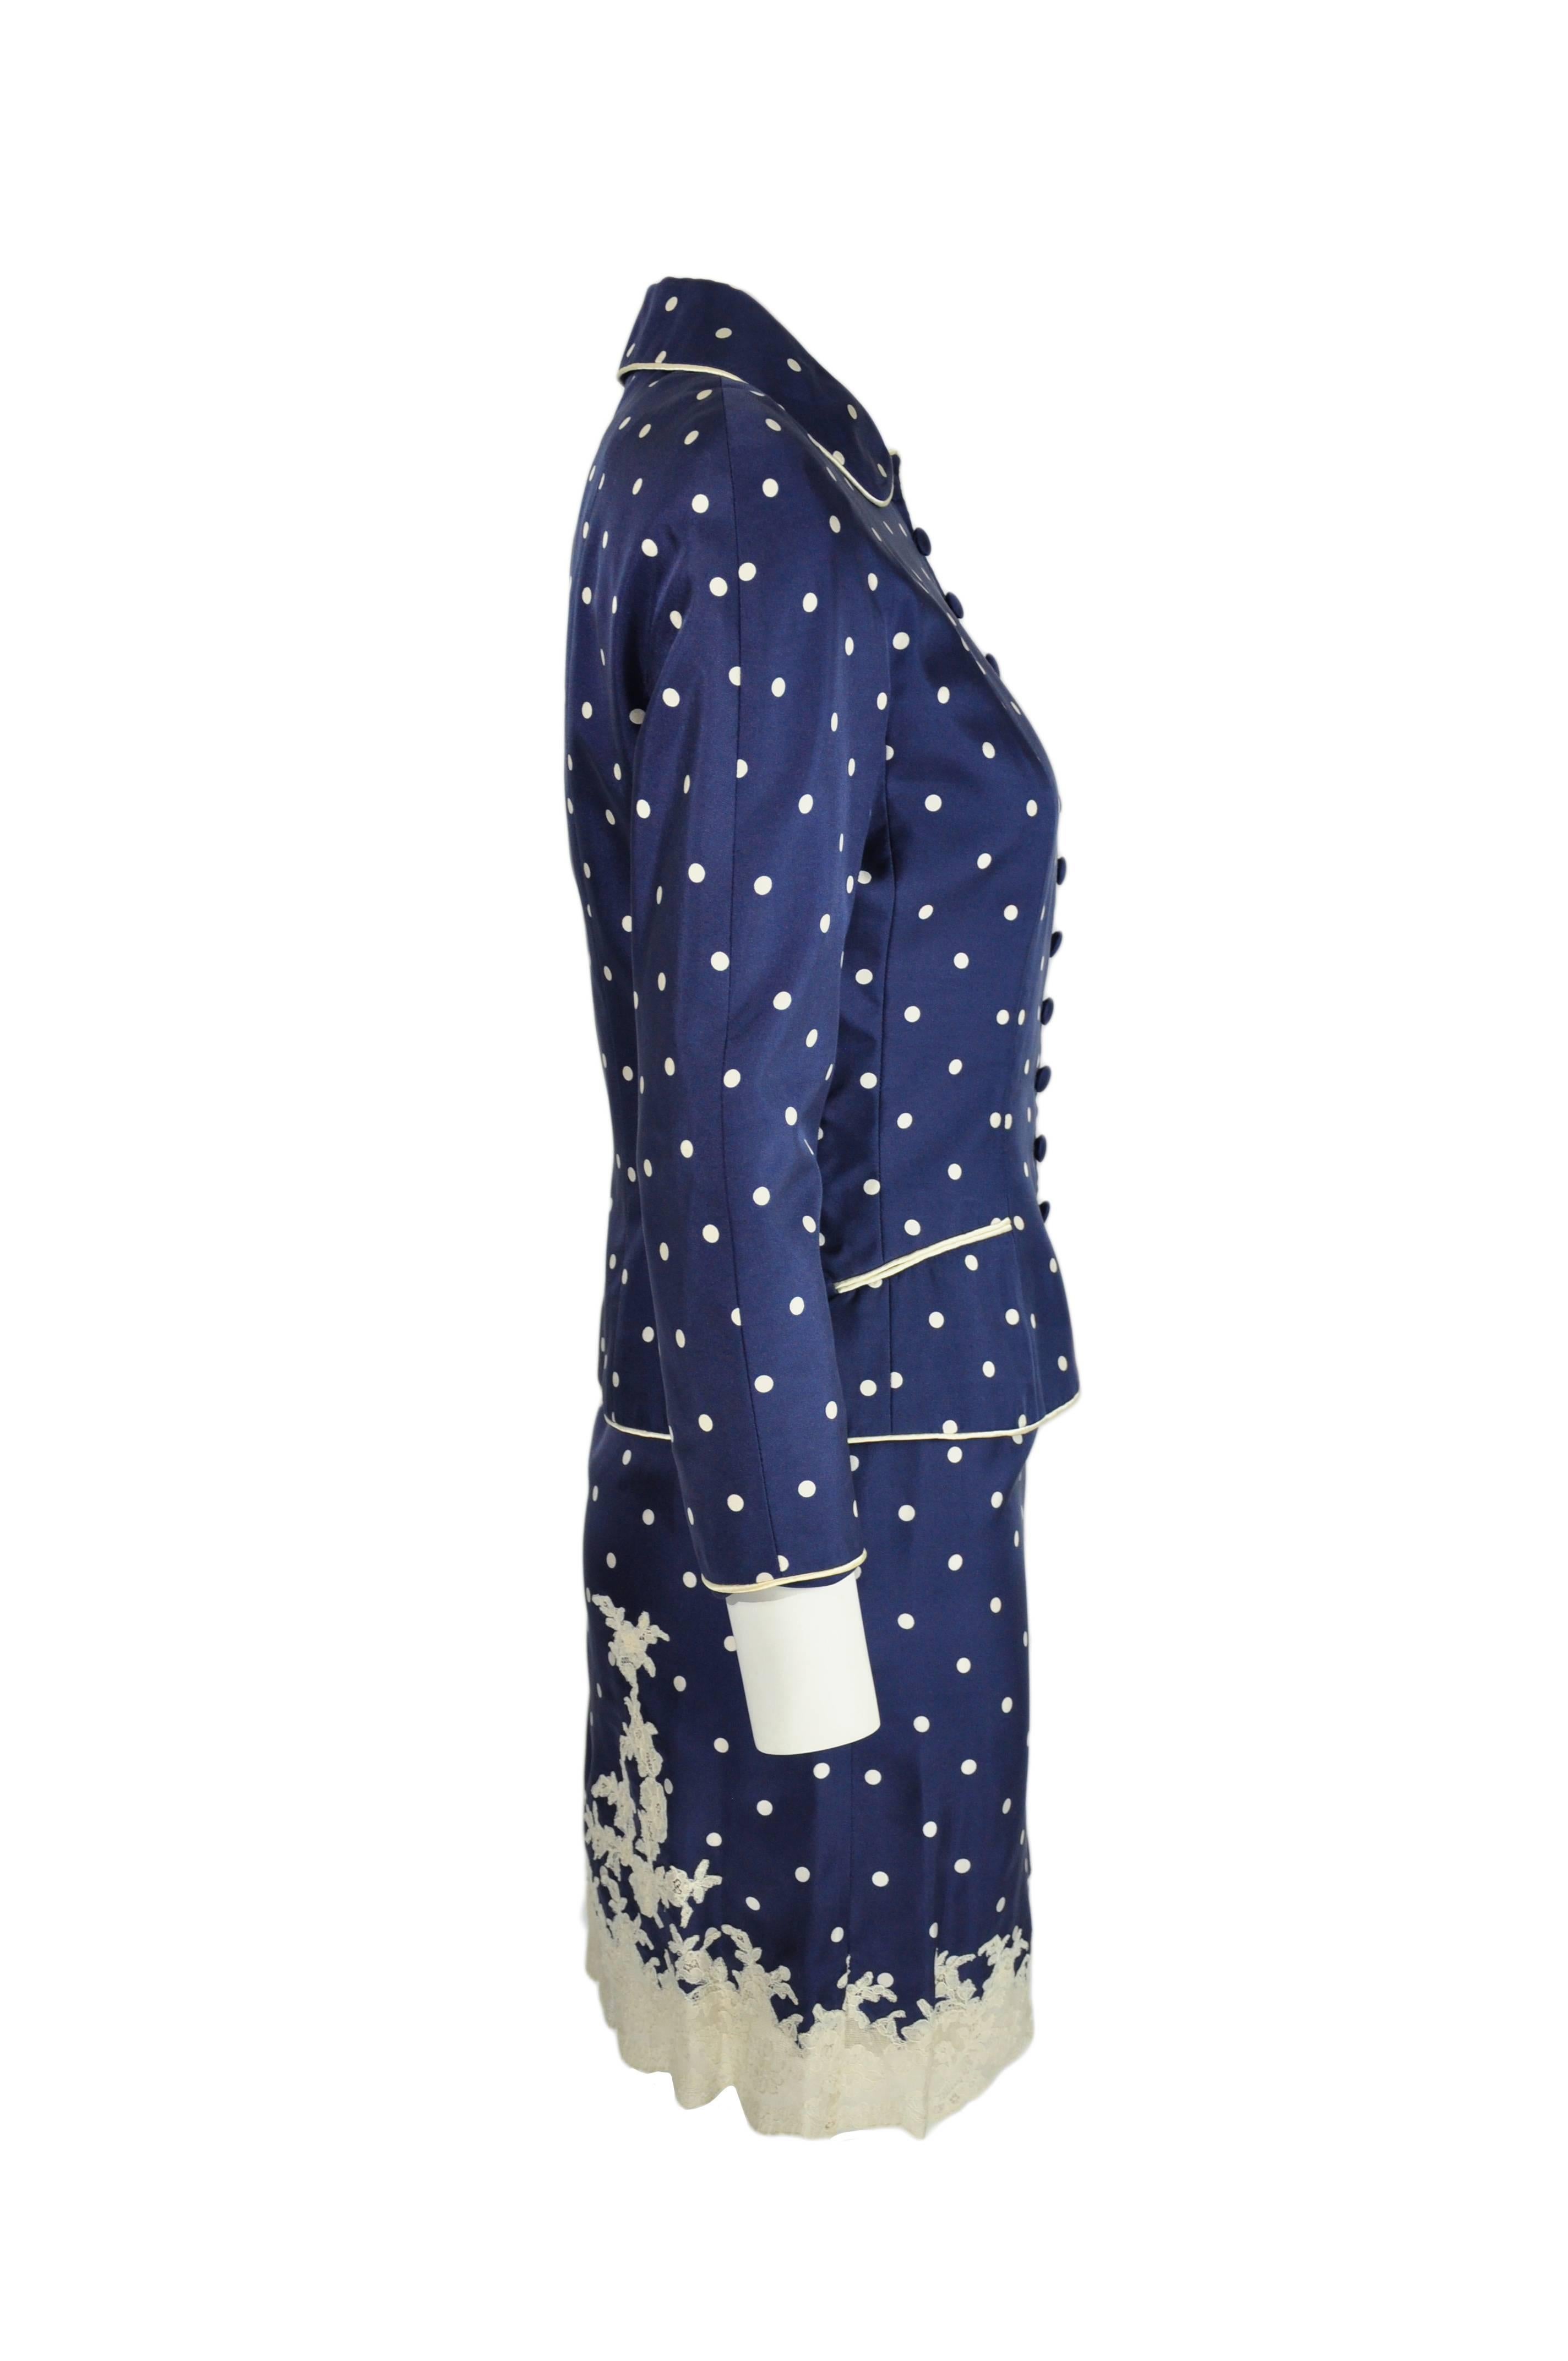 This classic and timeless navy polka dot silk jacket and skirt with lace hem is from Christian Dior by John Galliano in 90's.  The jacket features button fastening through front with two welt pockets, white pipping and fully lined. The skirt